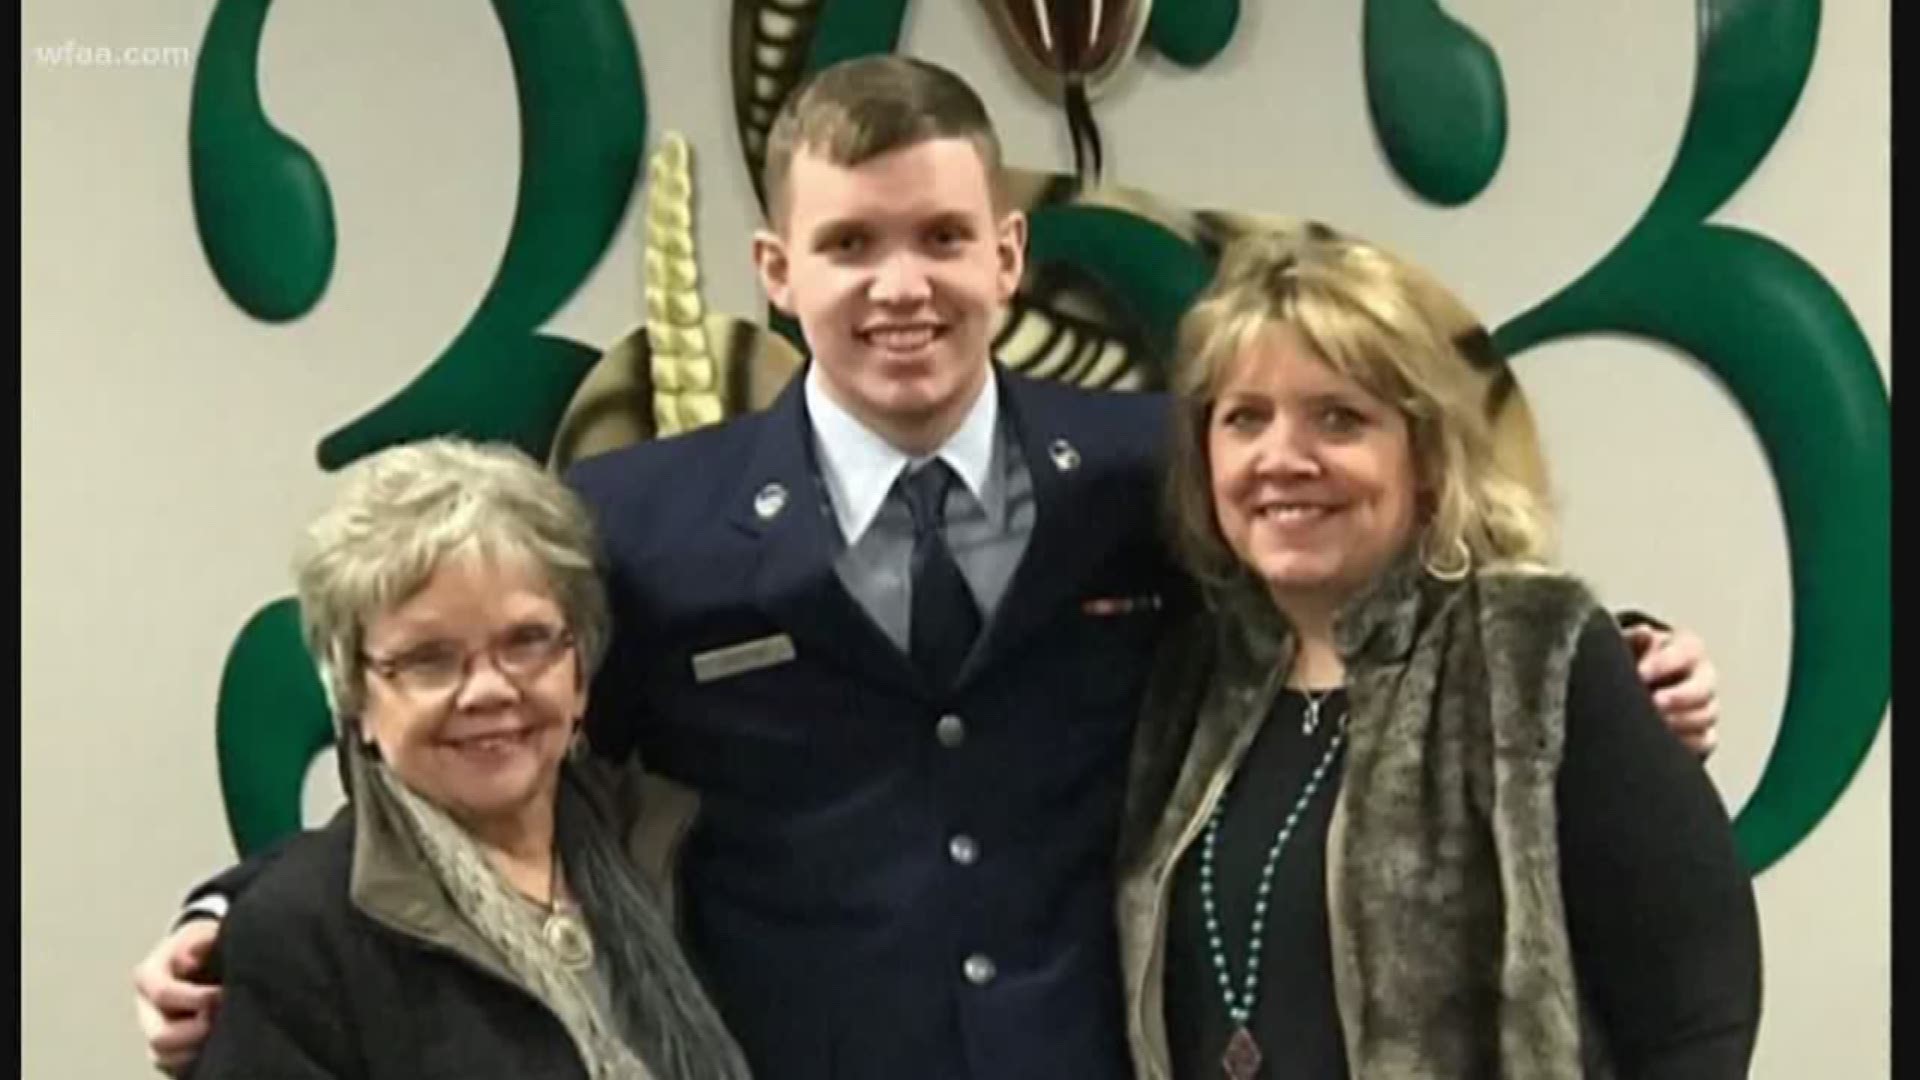 "Are you really here?!" Airman surprises mother for Christmas